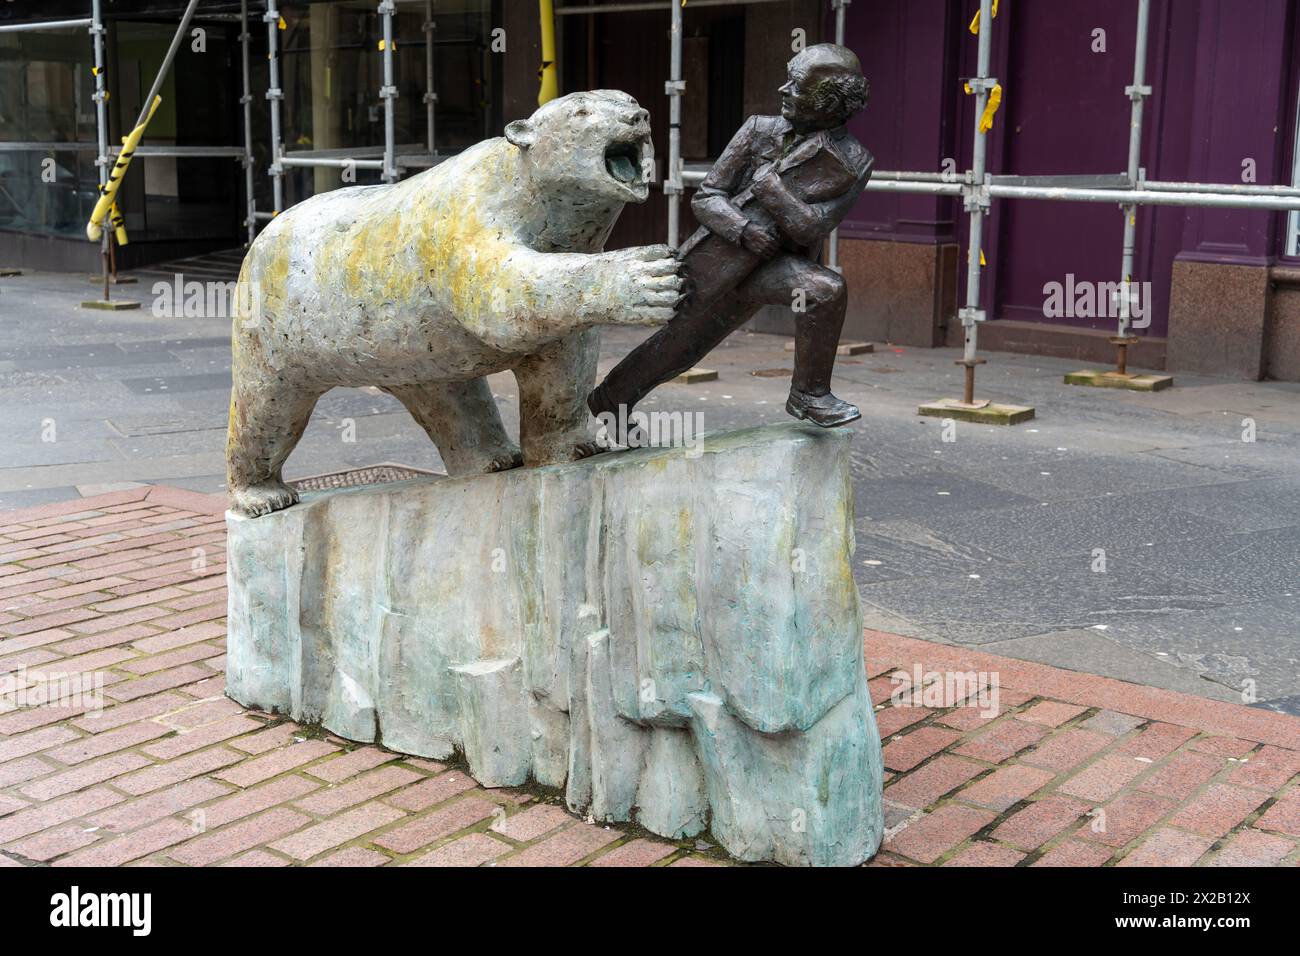 Public art sculpture,  Mr Jamieson the Draper and the Polar Bear by David Annand in the city centre of Dundee, Scotland, UK Stock Photo